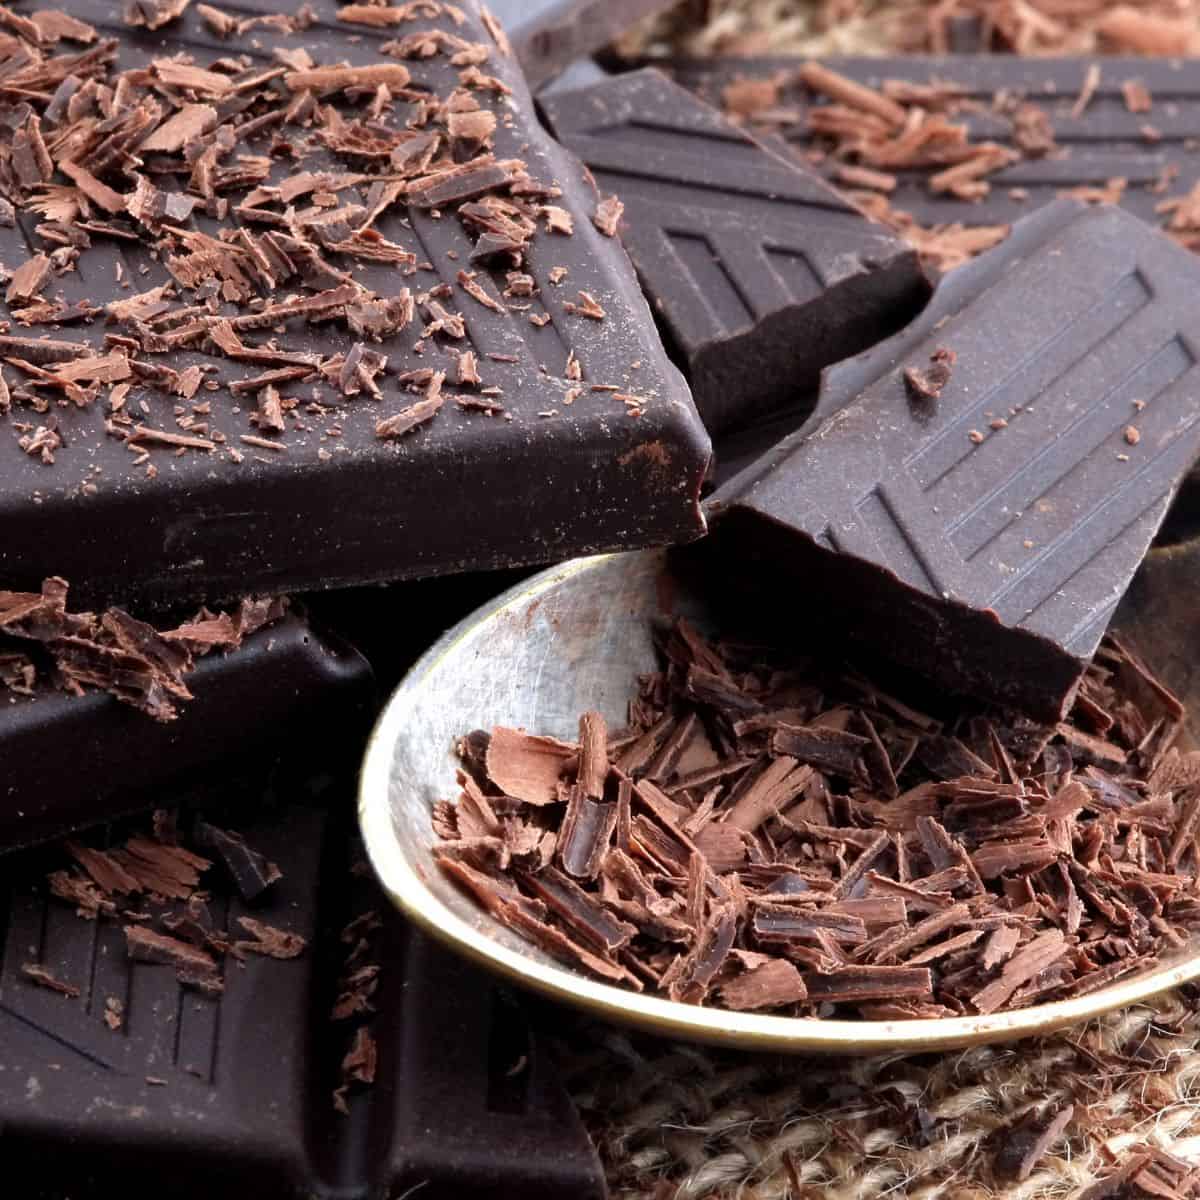 Dark chocolate is a cortisol lowering food to aid in stress relief.